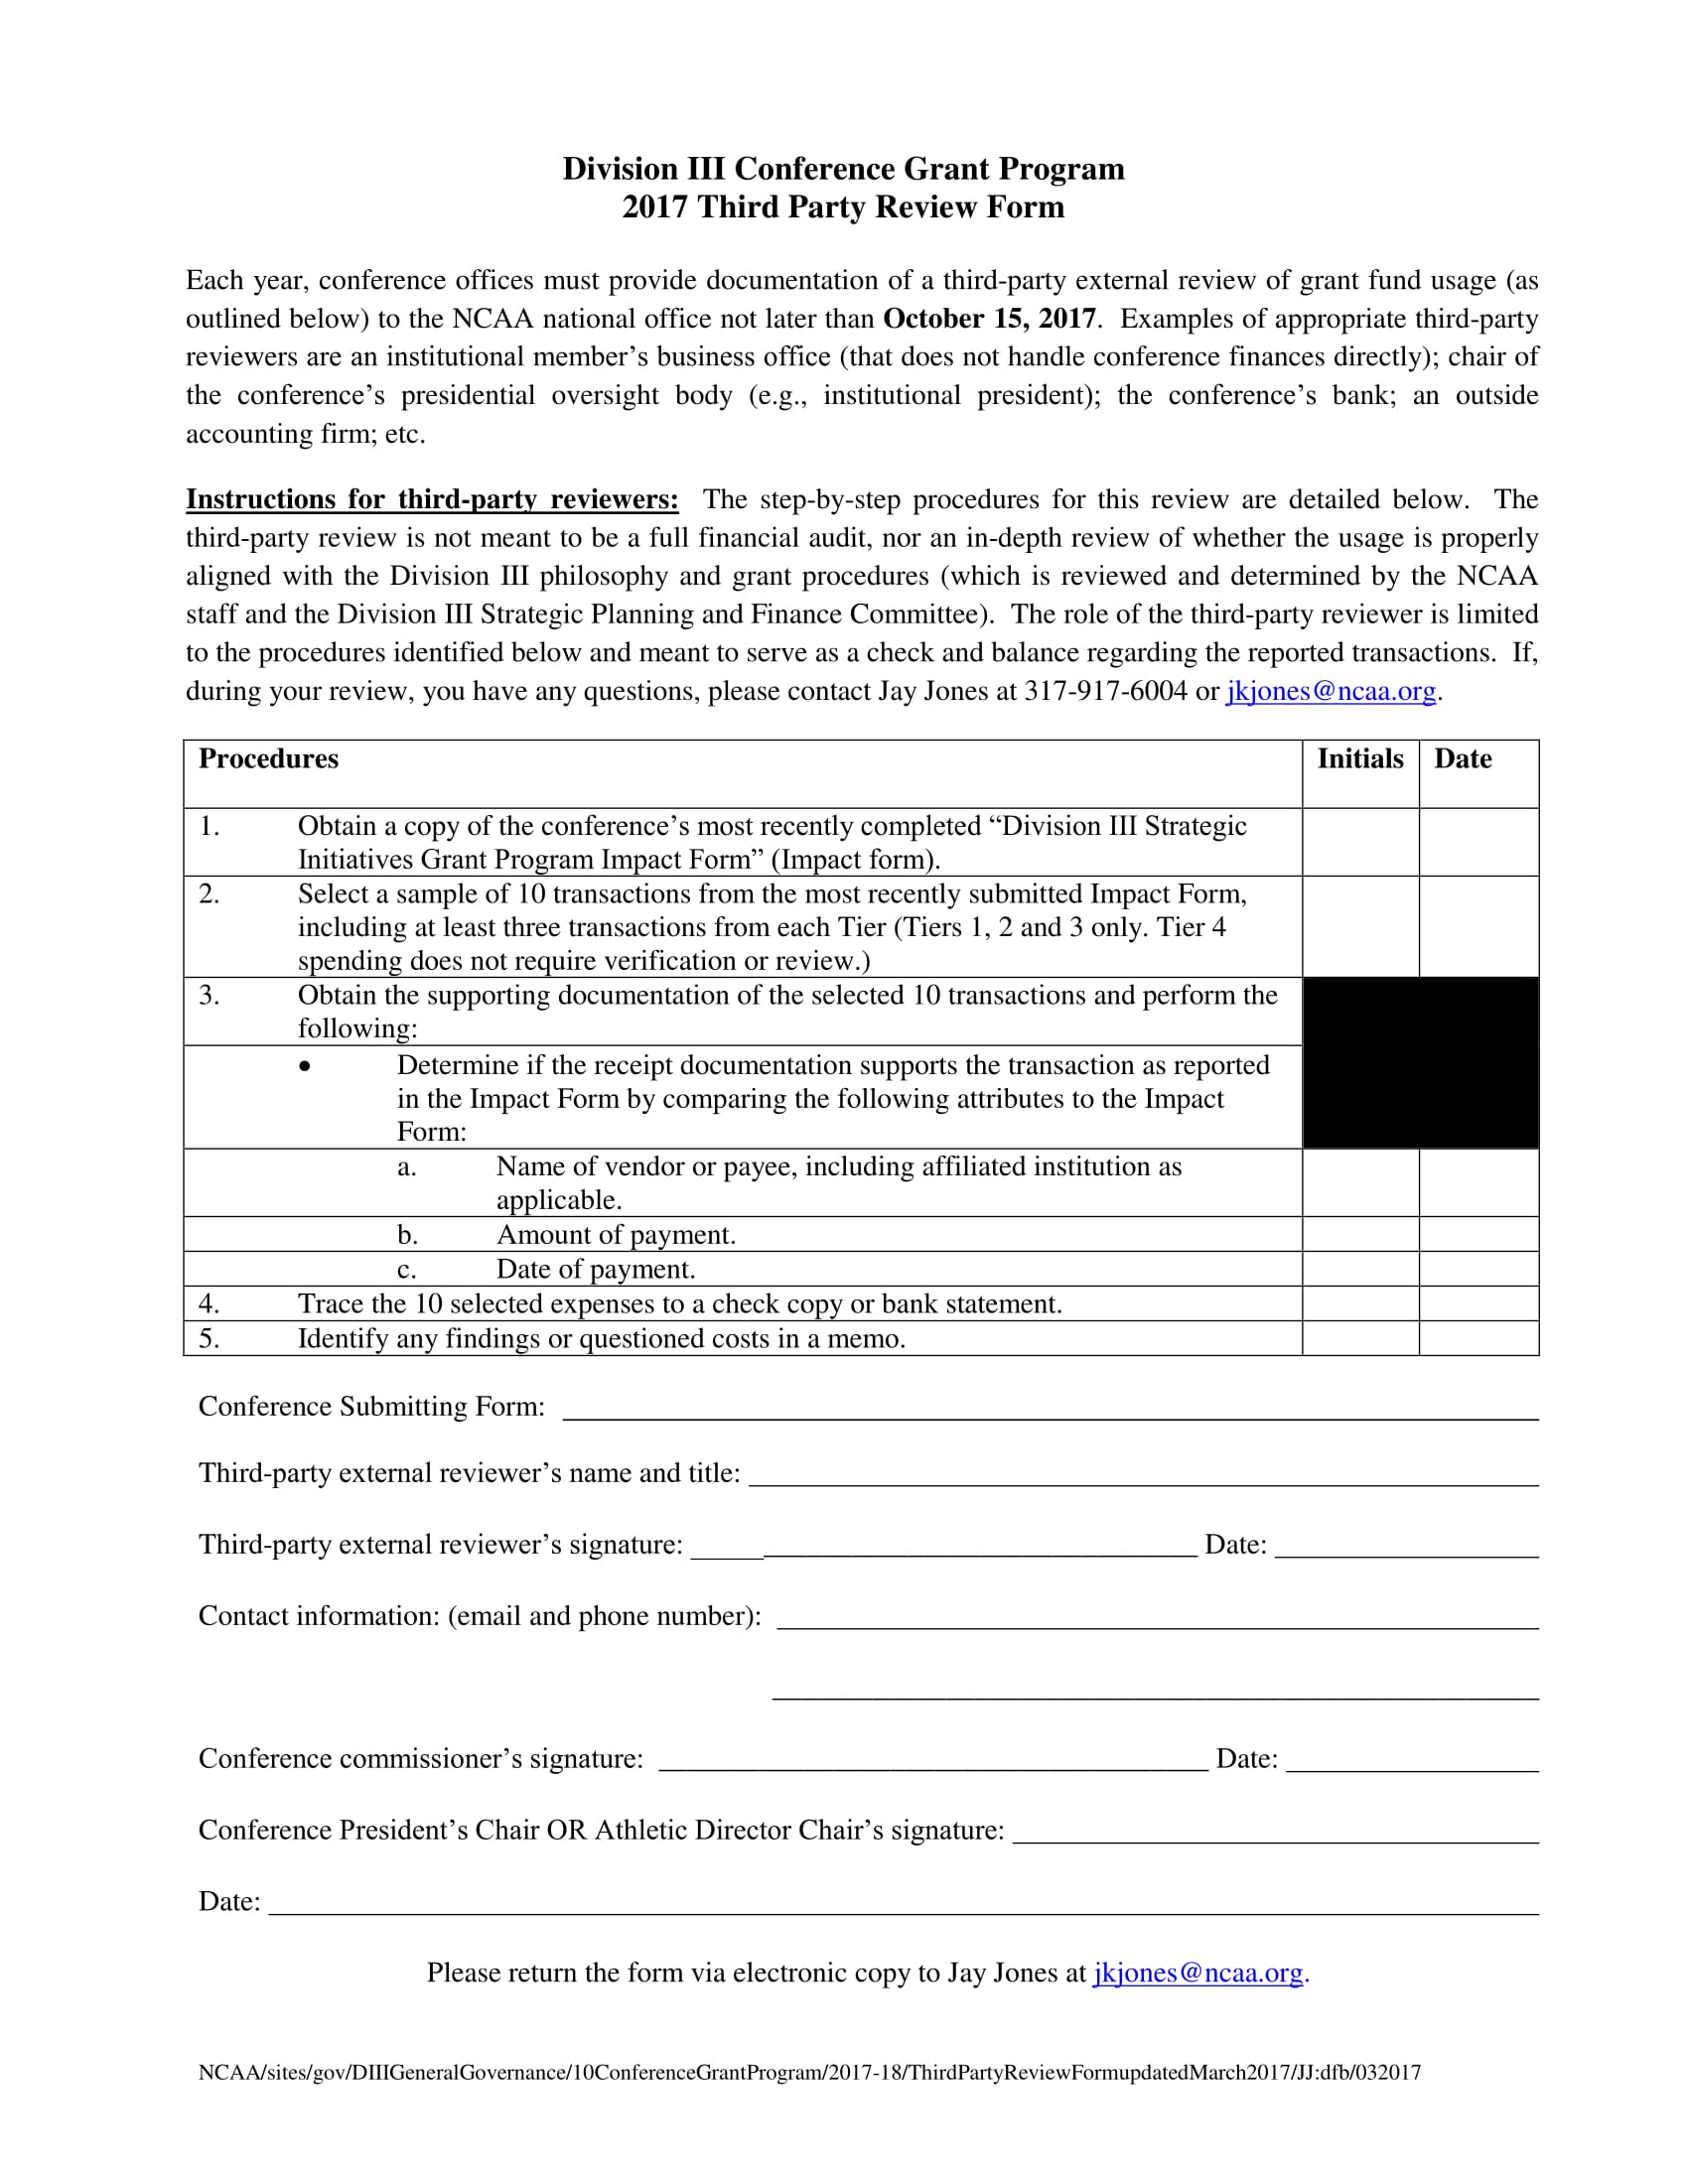 third party grant review form 1